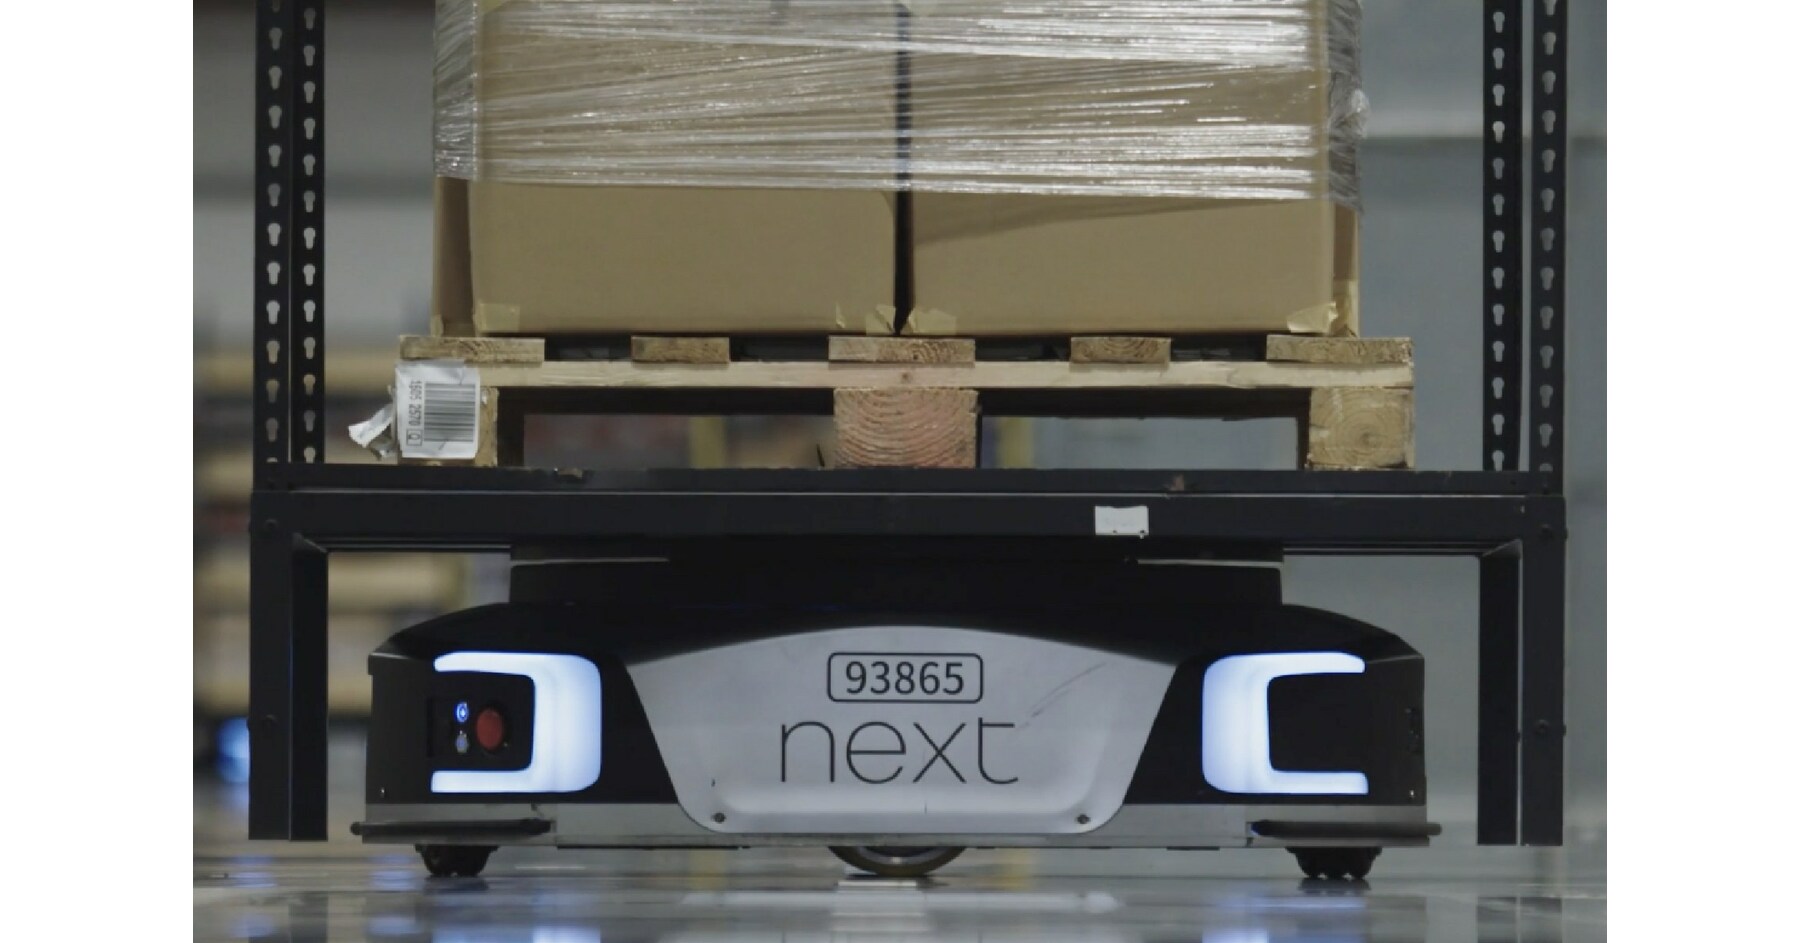 Geek+ hybrid “Pick-and-Sort” solution streamlines order processing for UK retail giant NEXT